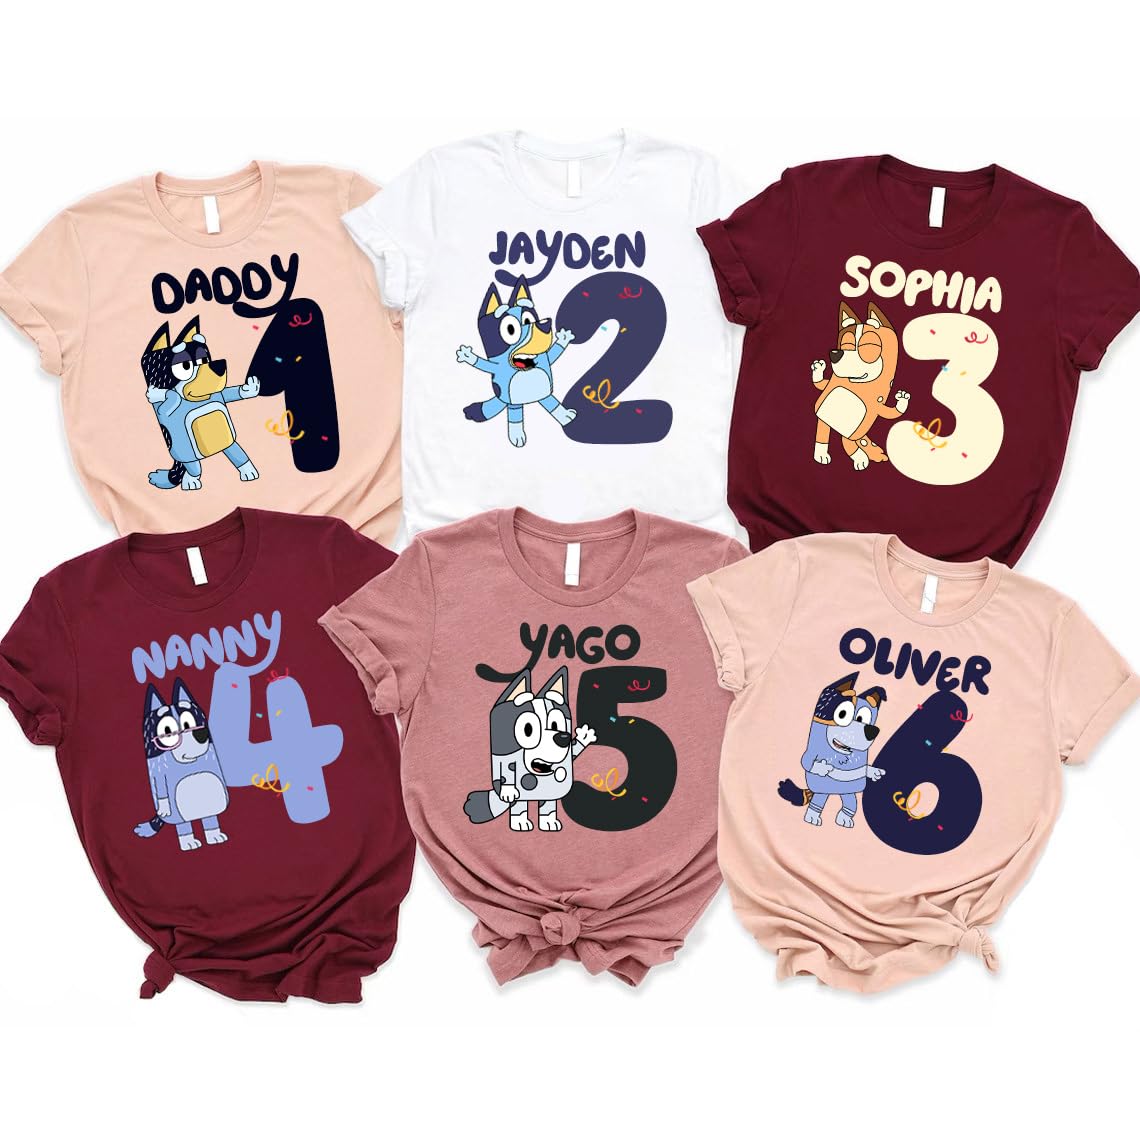 Personalized Family Birthday Shirt, Matching Birthday Shirts for Family, Friends Matching Shirt, Custom Name Birthday T-Shirt for Kids Toddler, Cartoon Characters Shirts